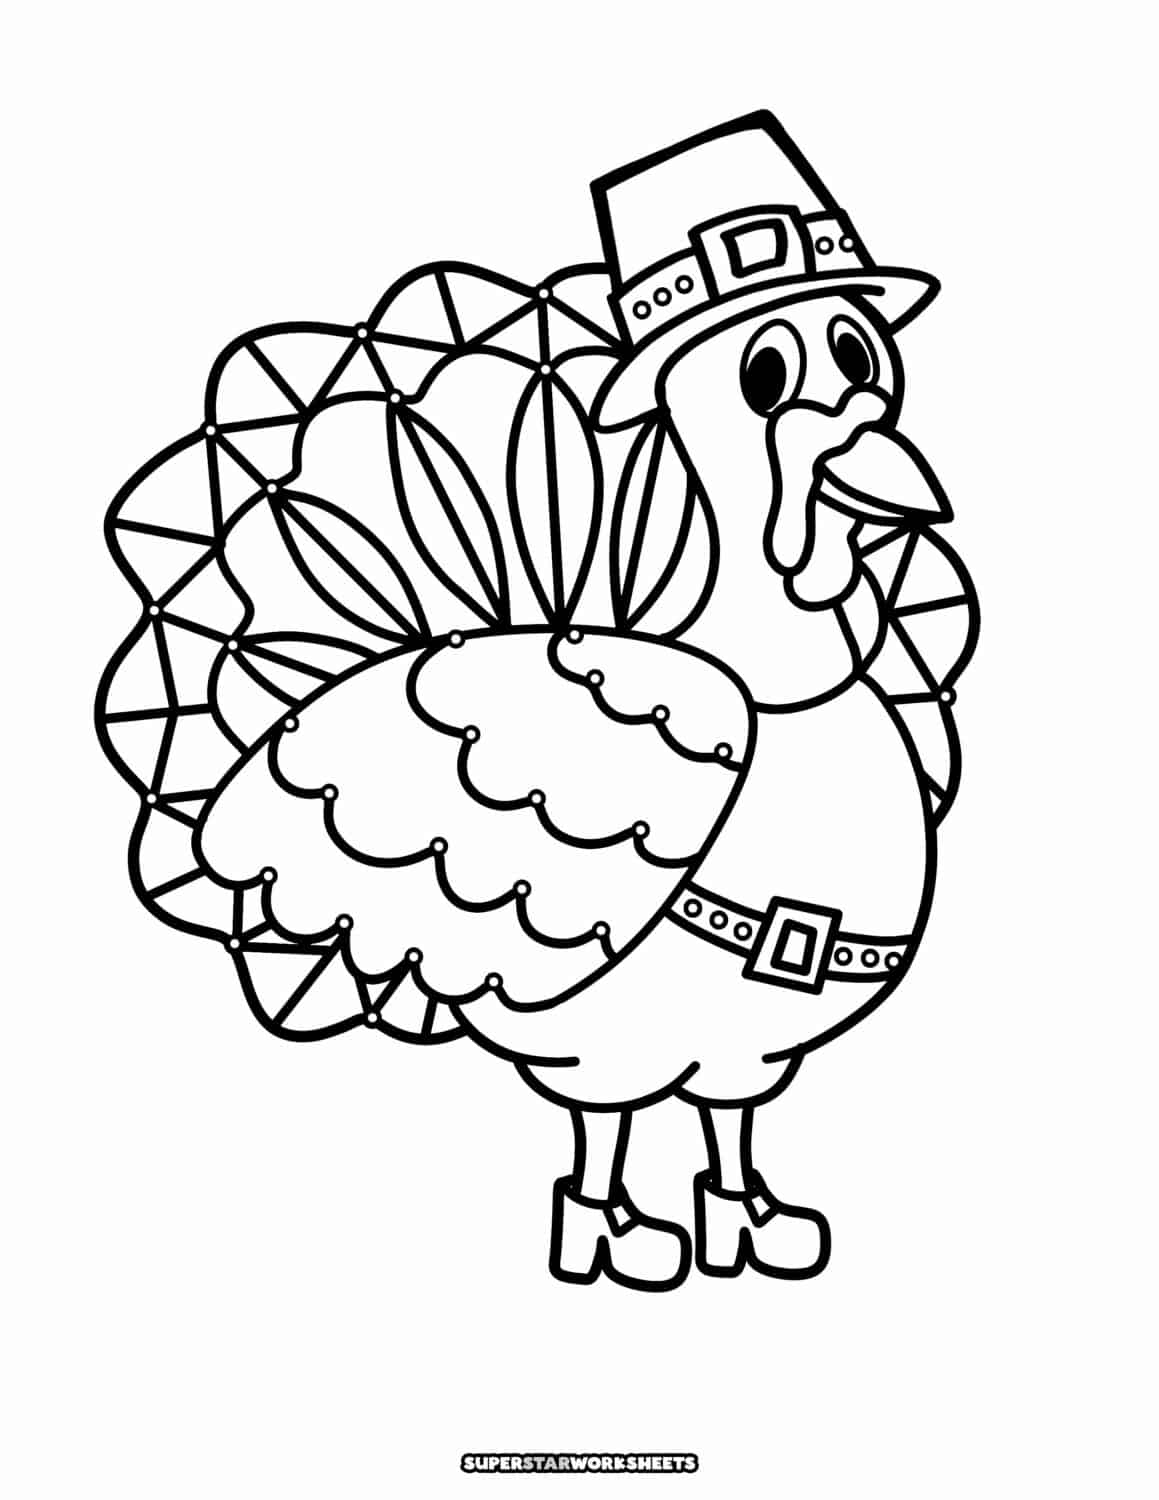 turkey coloring sheets to print